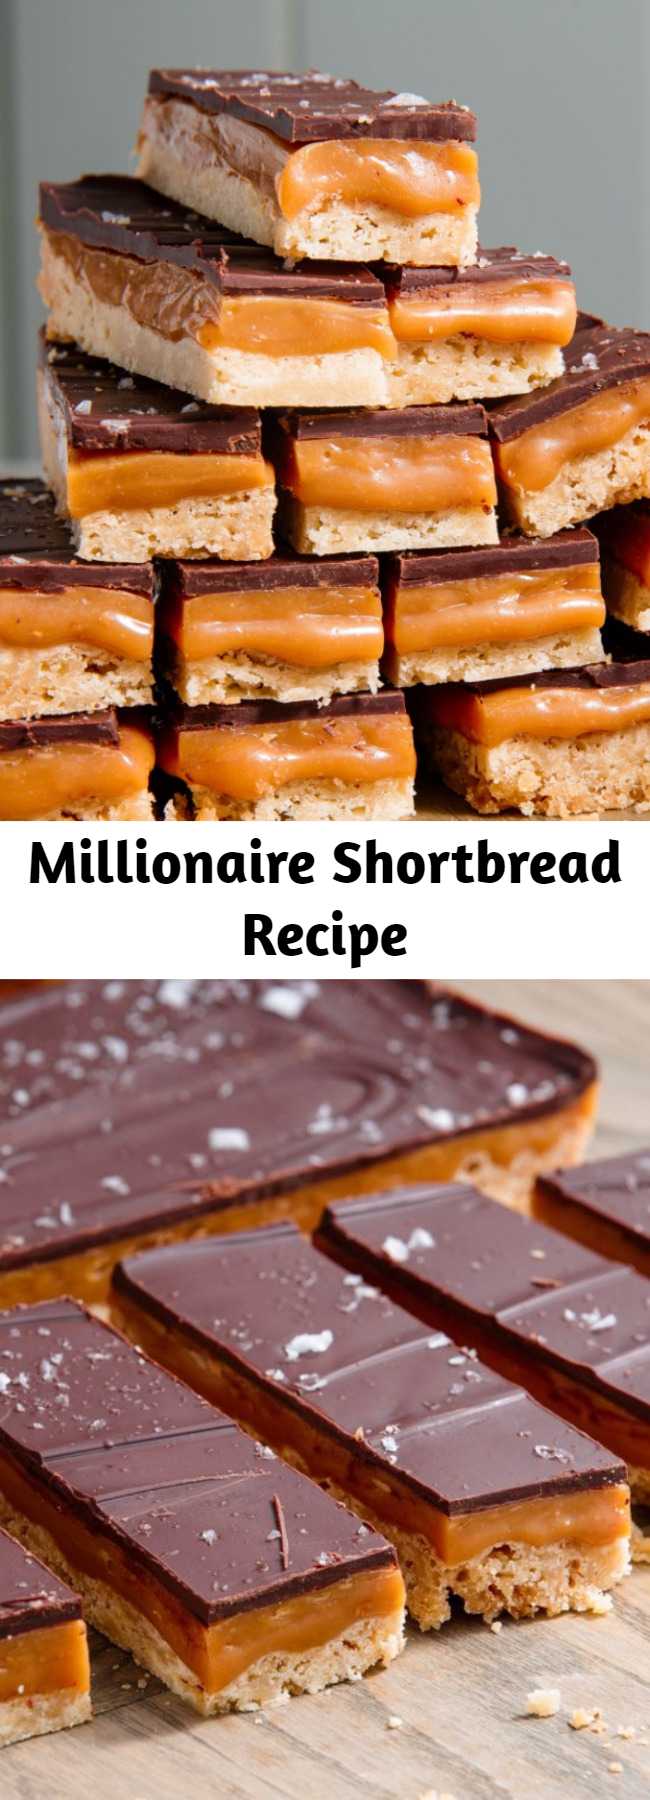 Millionaire Shortbread Recipe - It may look impressive (and daunting), but this classic Millionaire Shortbread recipe is insanely easy to bake at home. It starts with a perfect and simple buttery shortbread base. On top: a 2-ingredient caramel that starts with pre-made candies. To top it all off, a layer of decadent chocolate sprinkled with flaky sea salt.